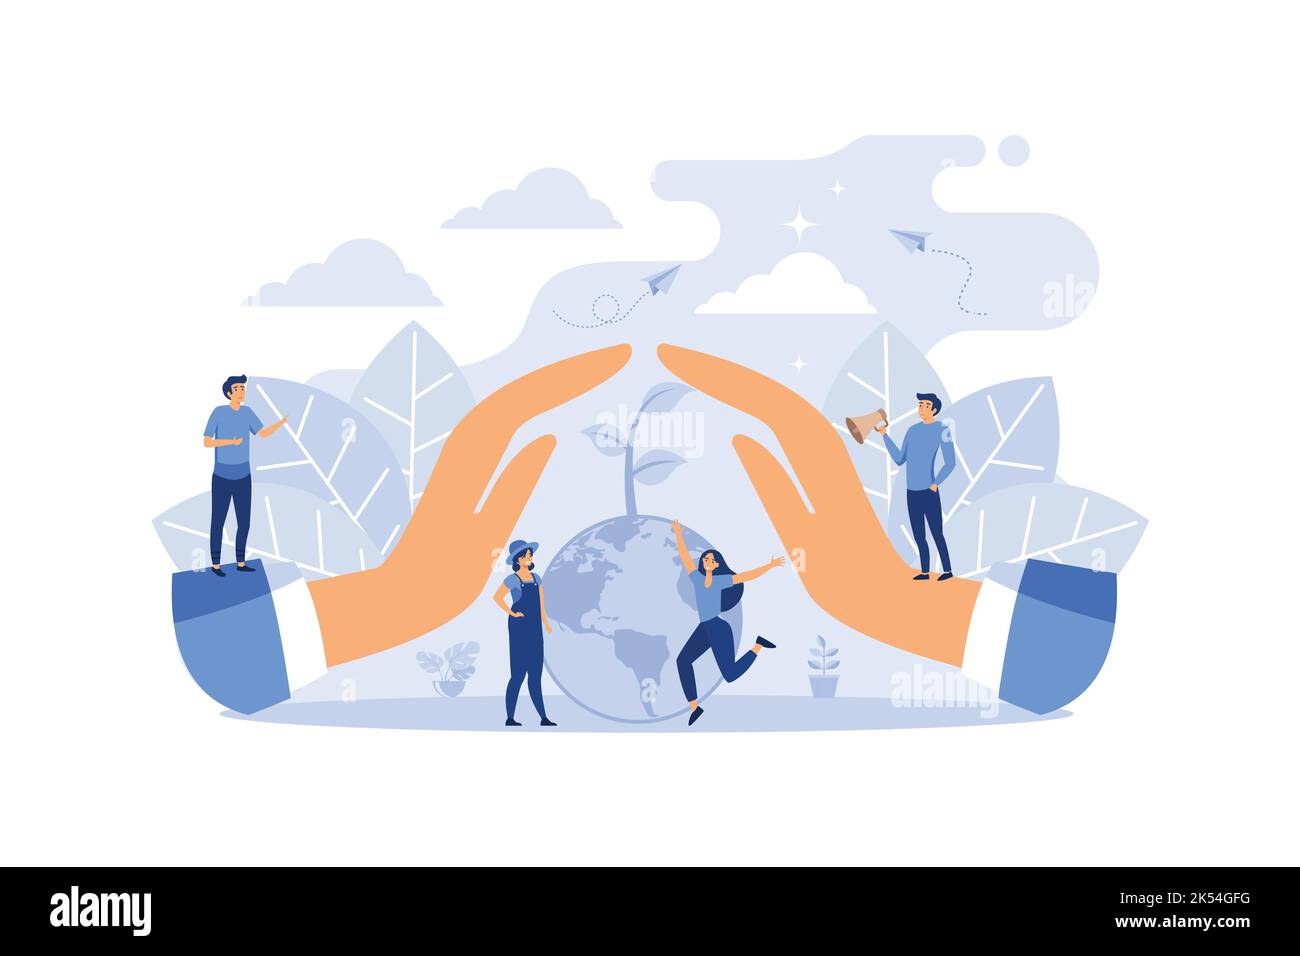 hands protect the planet from pollution. Save the planet concept., Plant a tree, save energy, Earth Day concept. flat design modern illustration Stock Vector